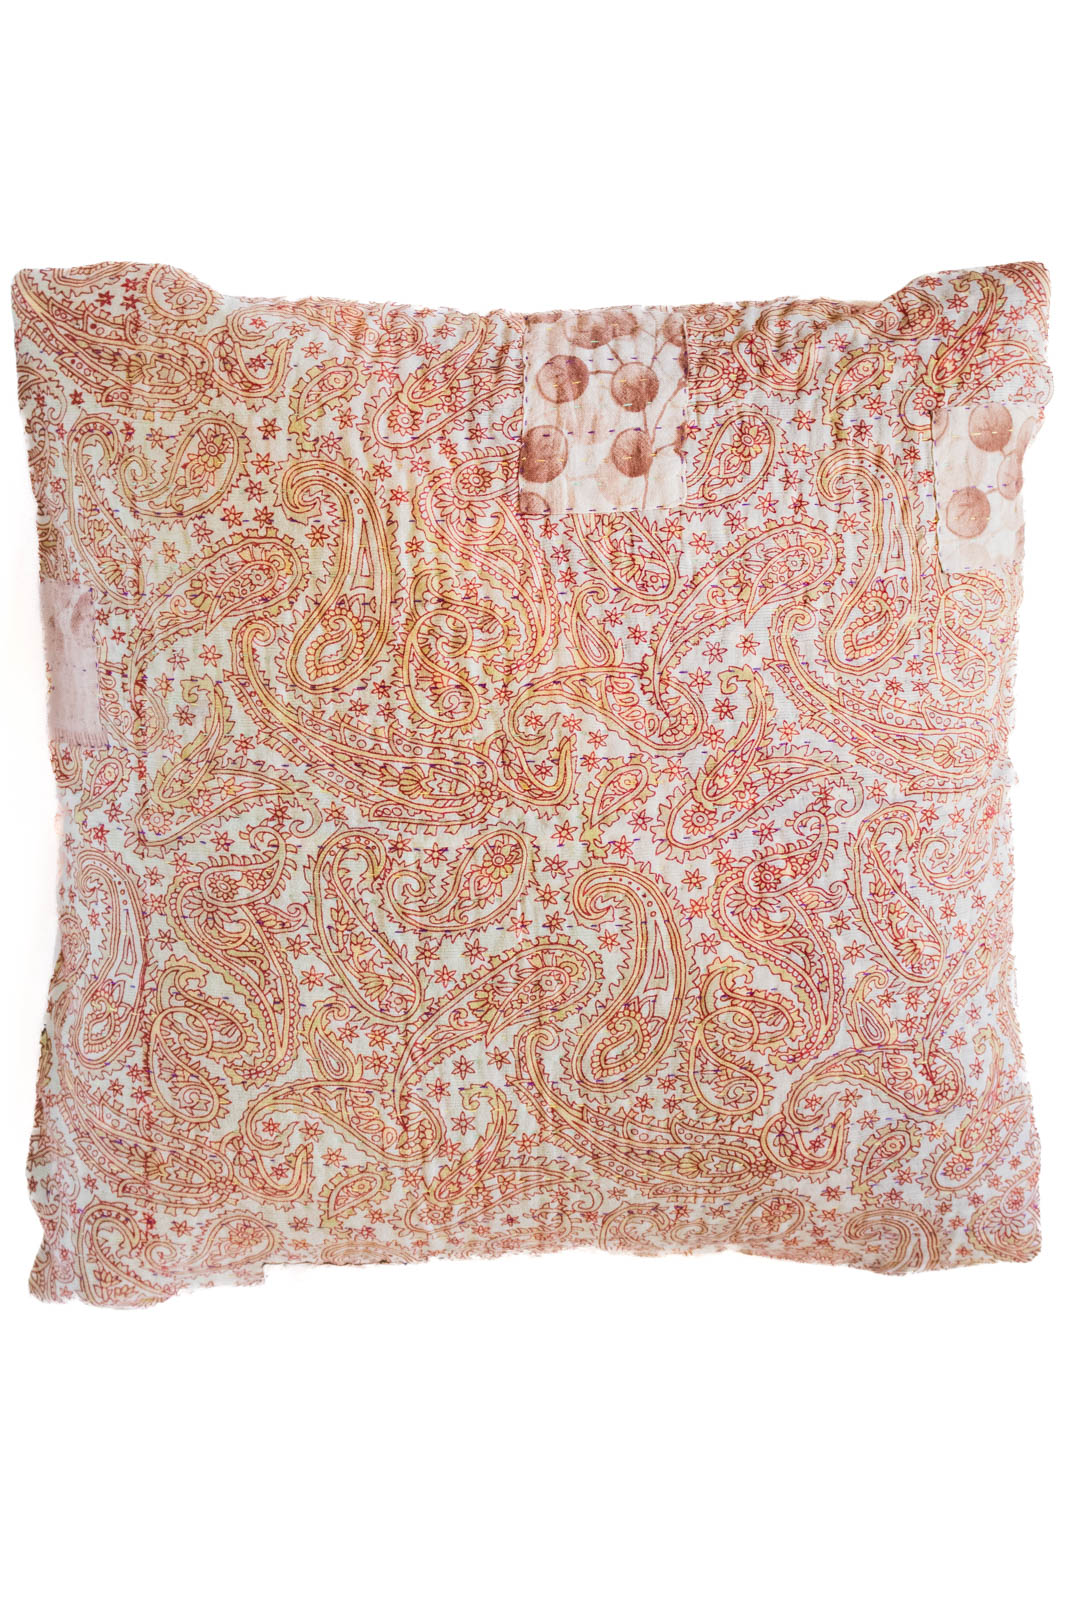 Worthy no. 3 Kantha Pillow Cover